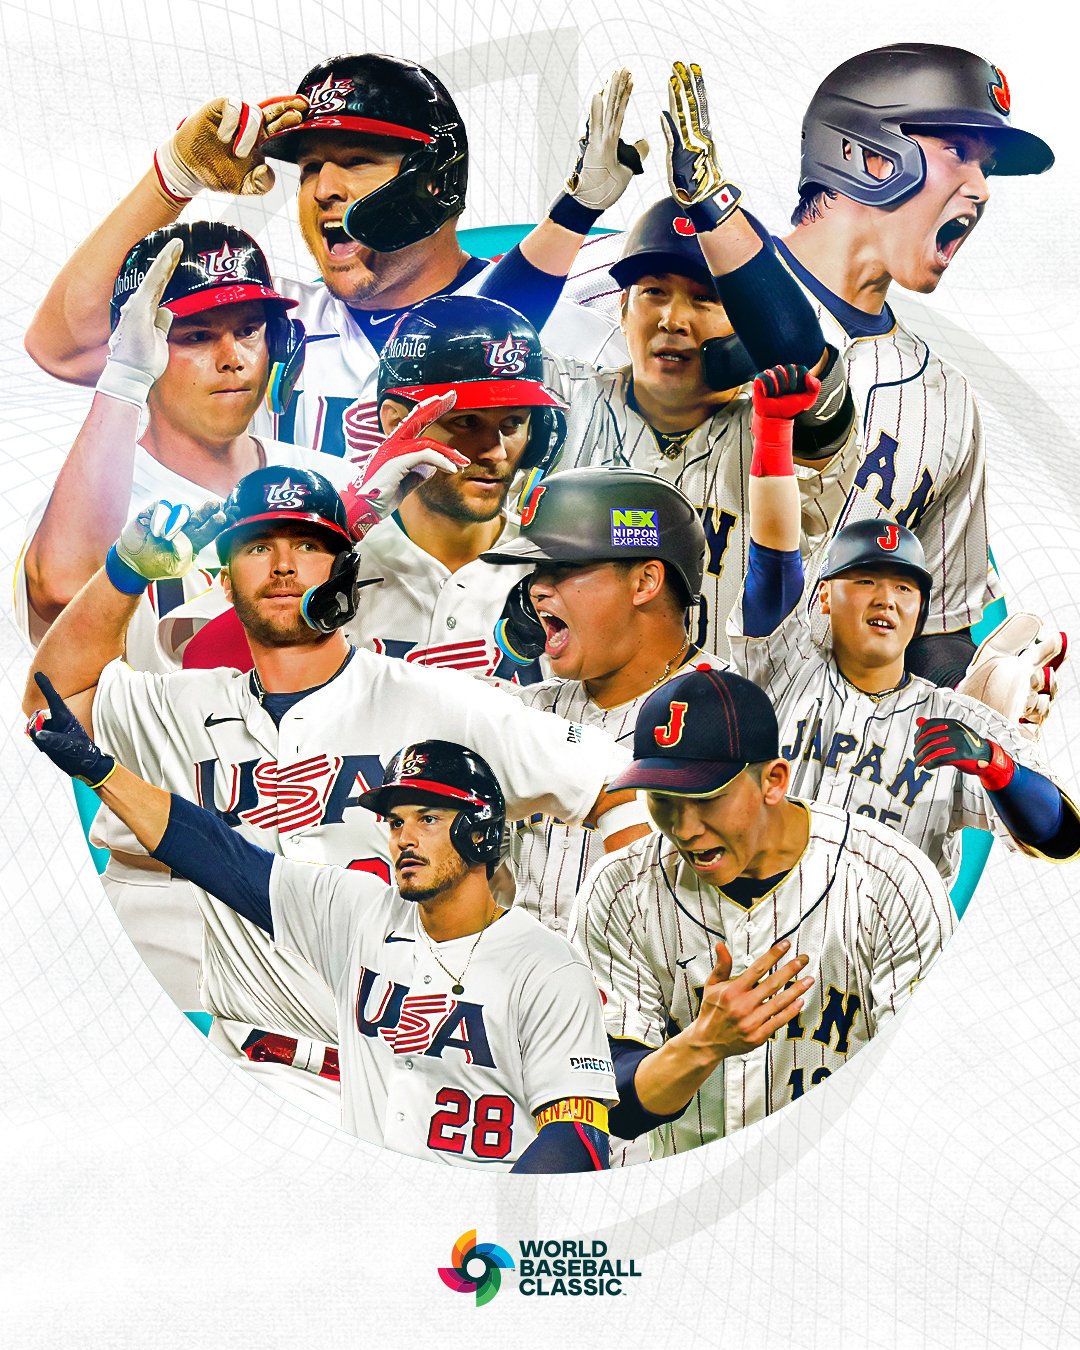 World Baseball Classic on X: All roads have led us here. Team USA